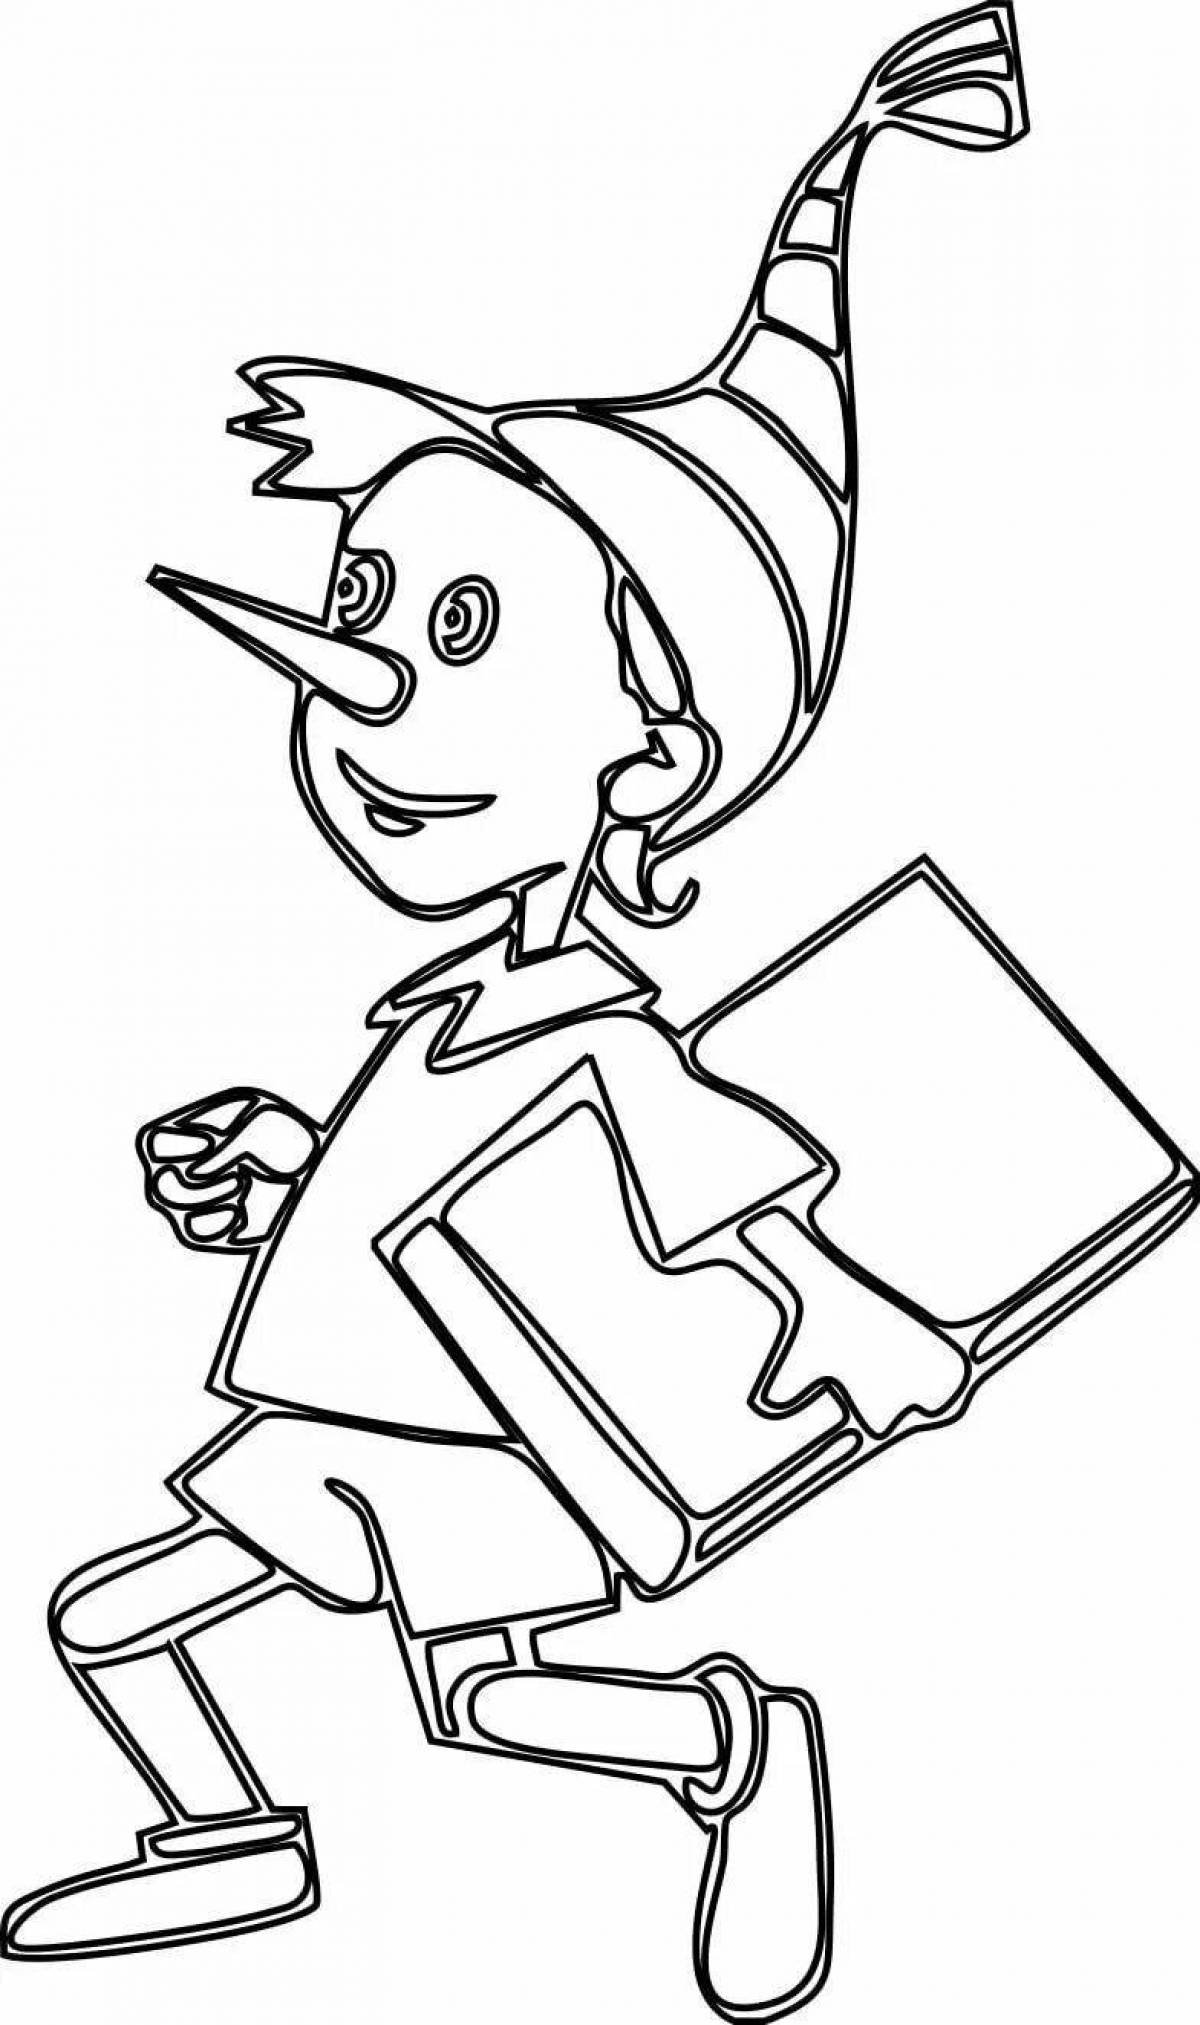 Glorious Pinocchio coloring page